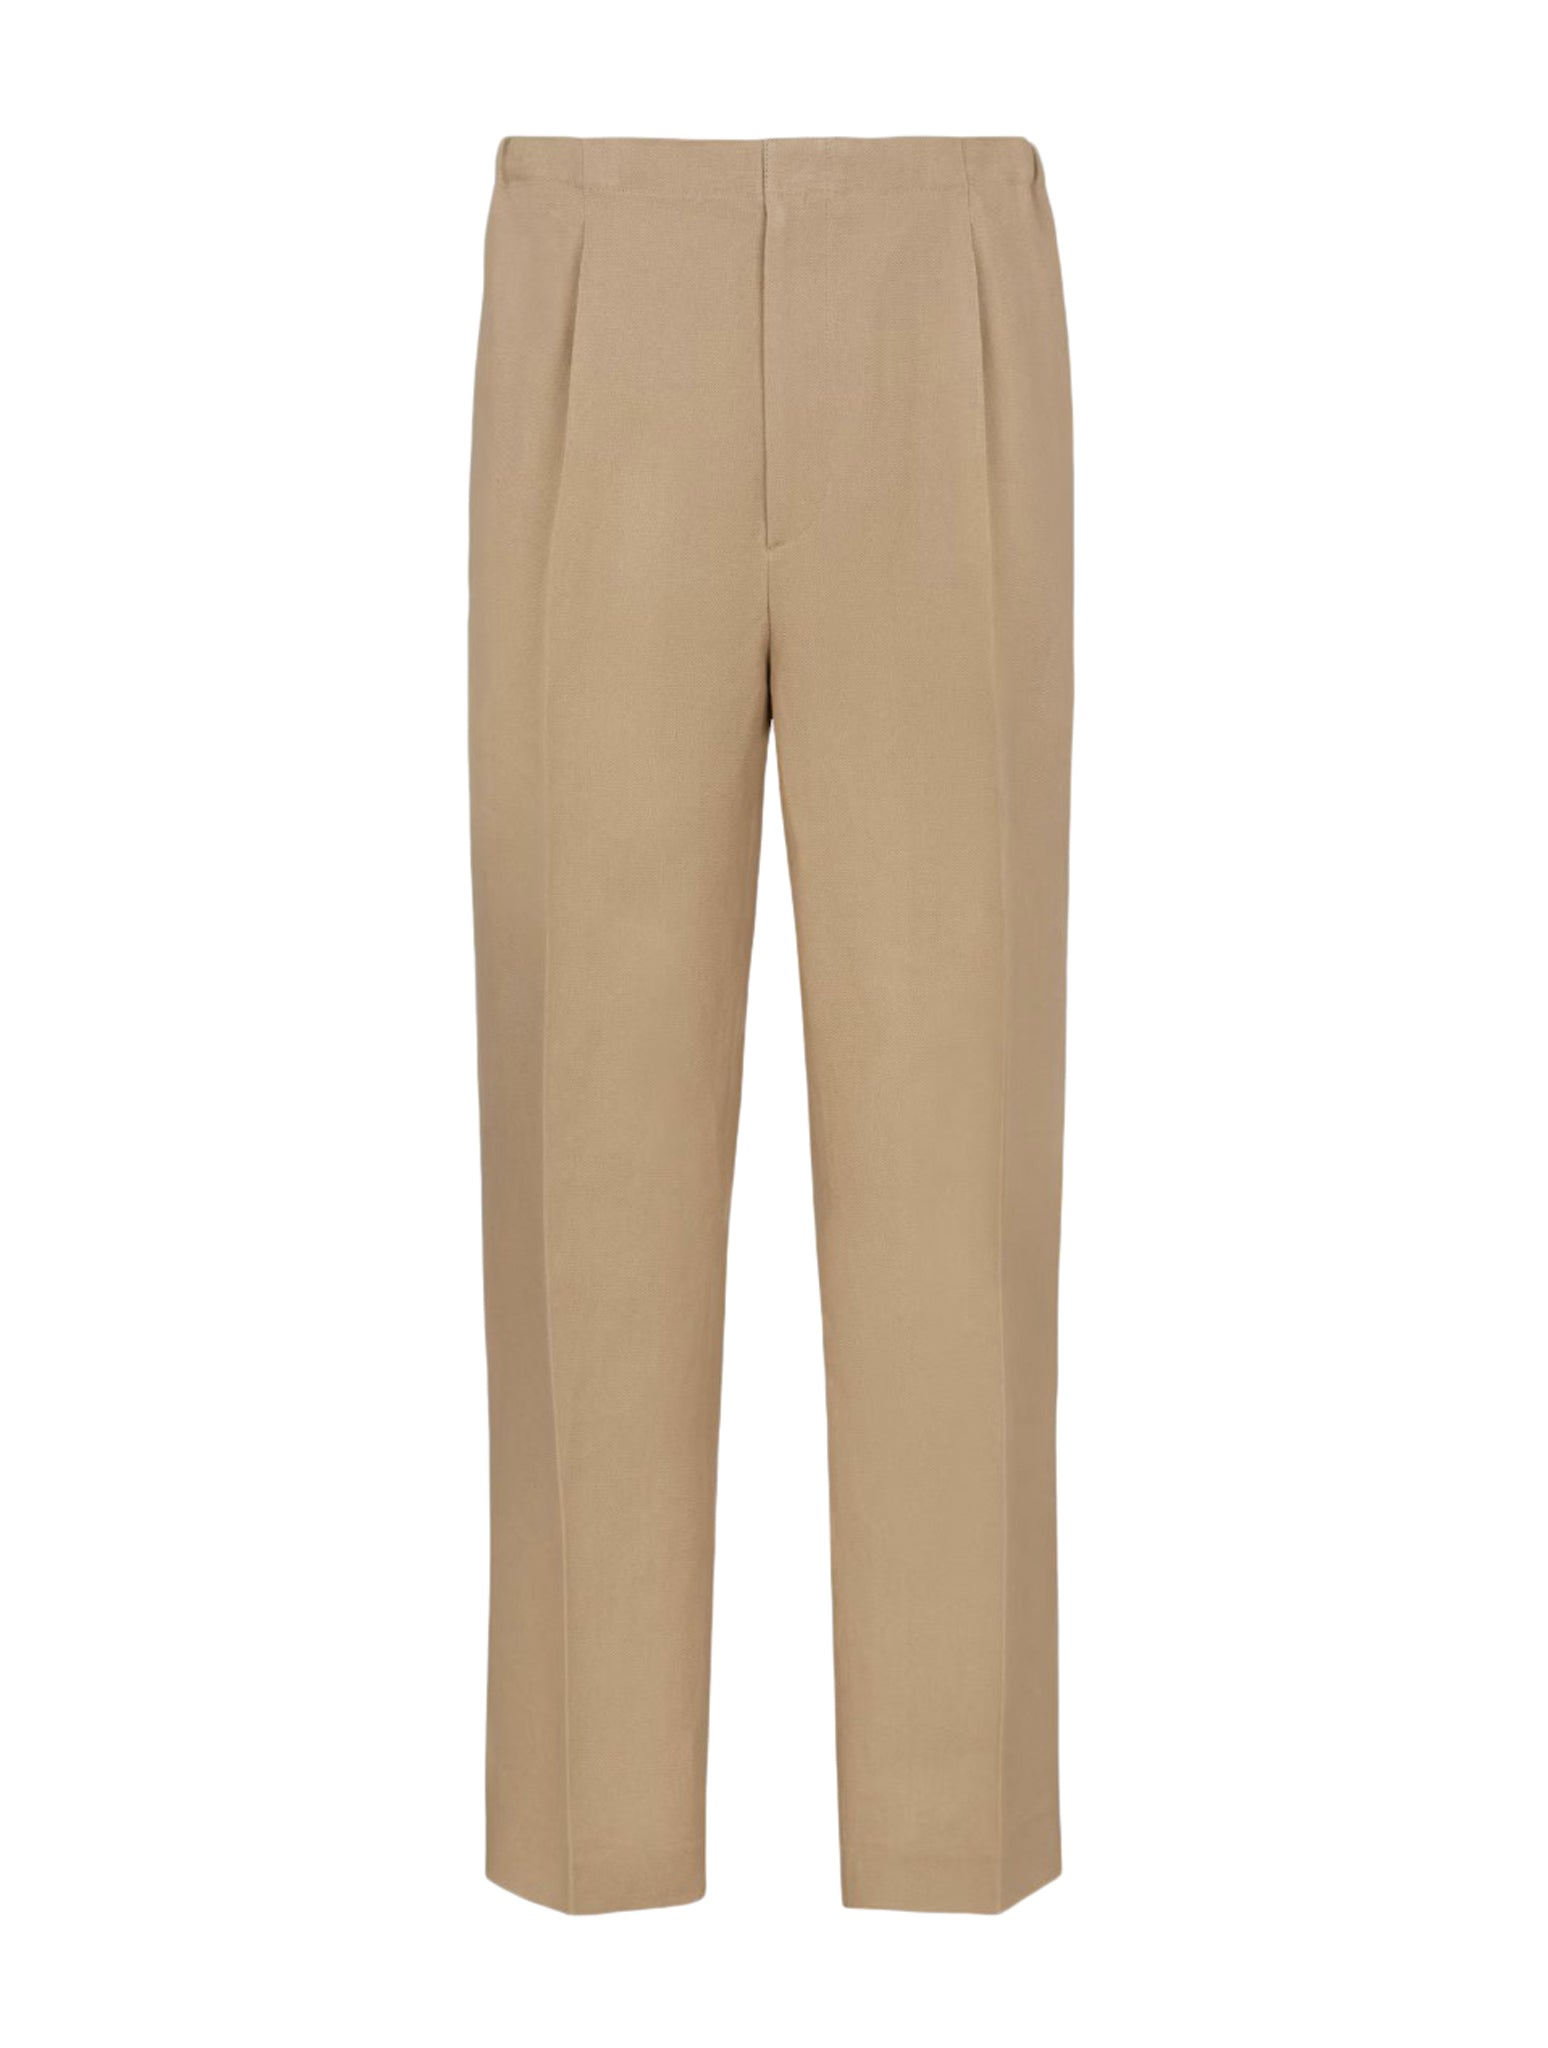 Beige canvas trousers